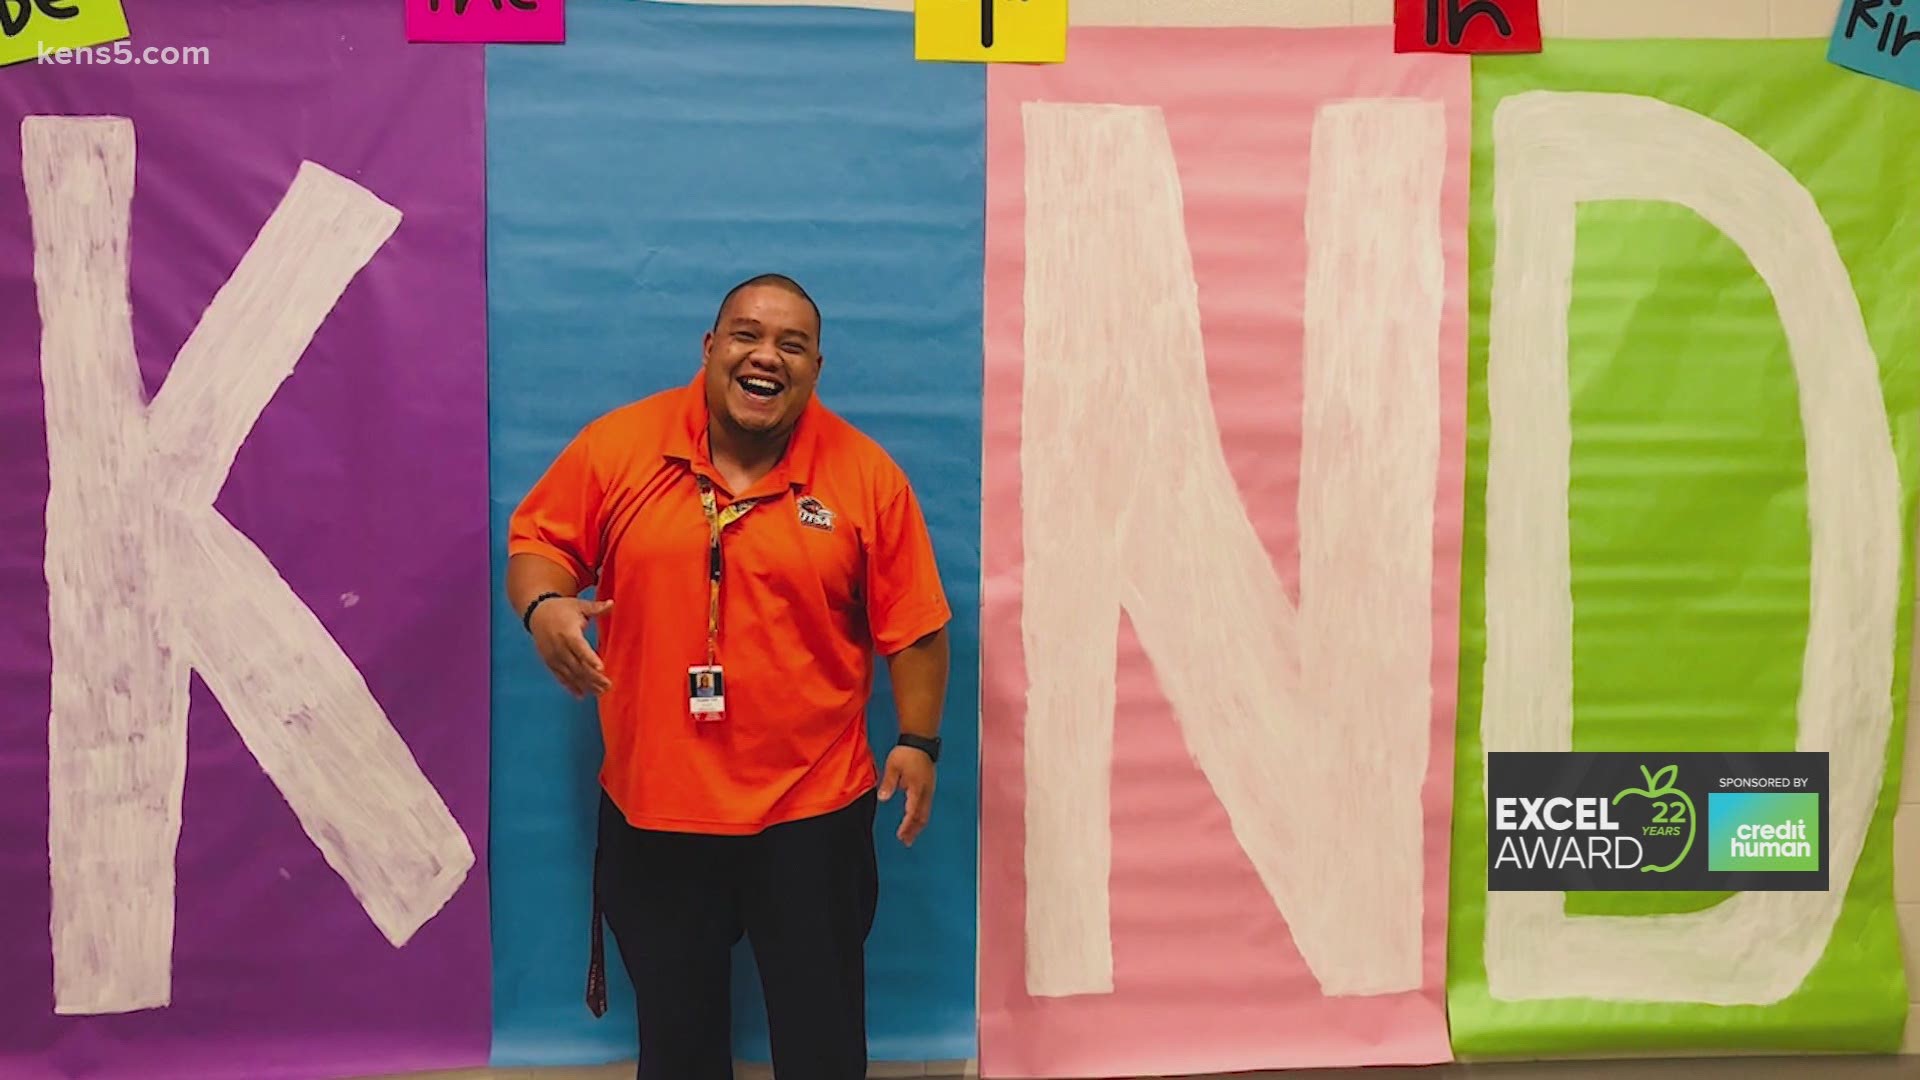 Meet this week's EXCEL Award winner who loves educating his students at Southside ISD.